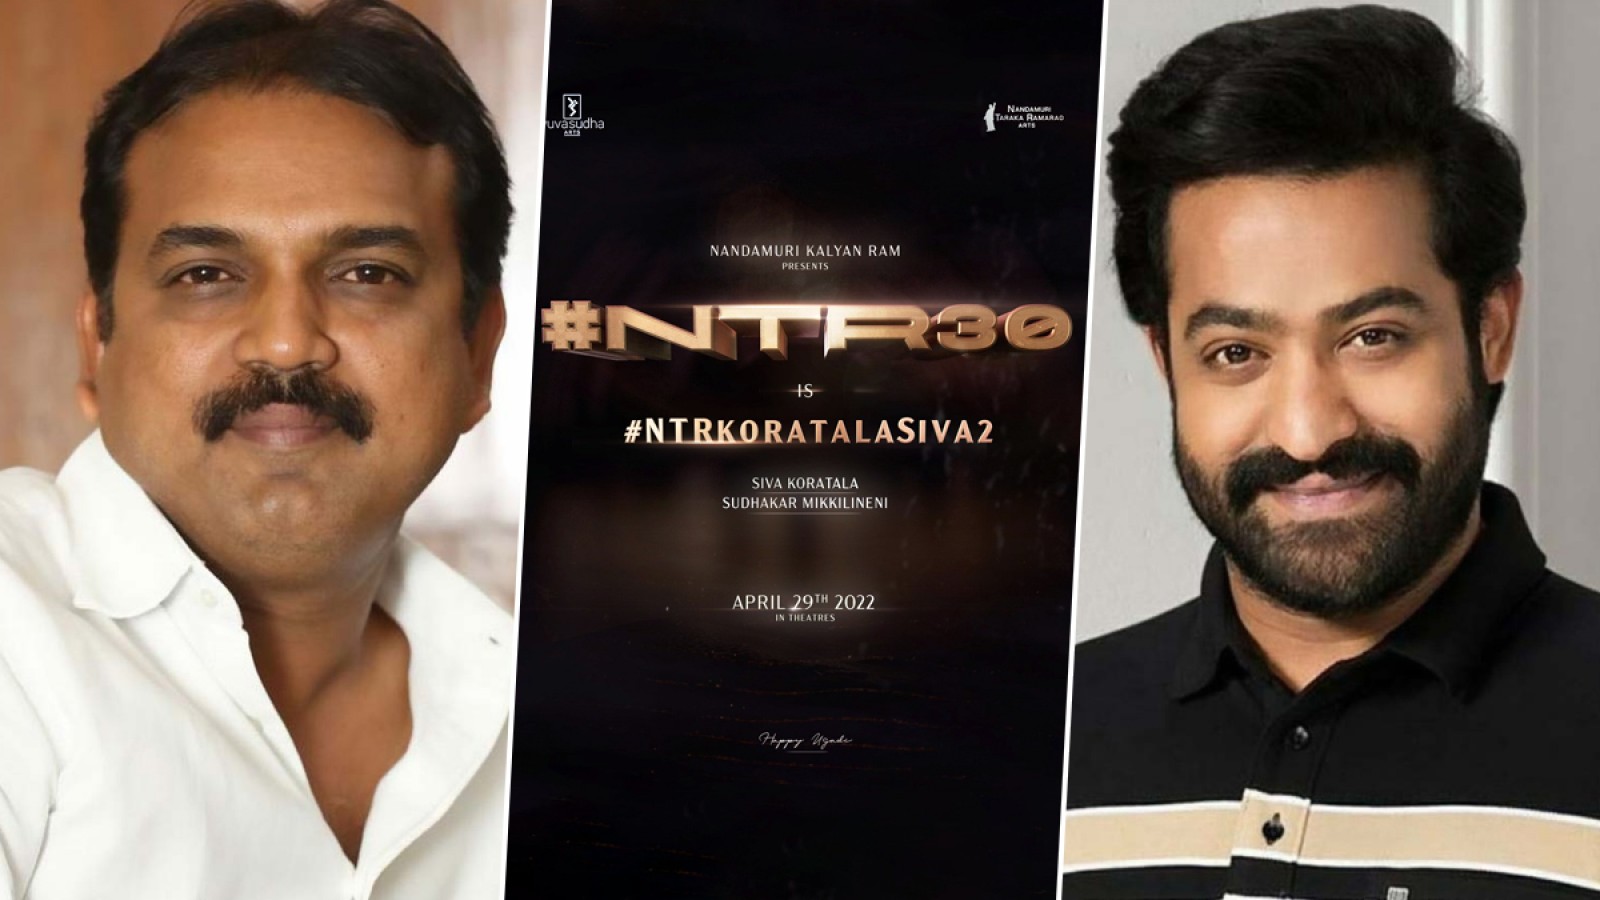 NTR30 : Jr. NTR and Koratala Siva officially confirmed next project together | NewsTrack English 1